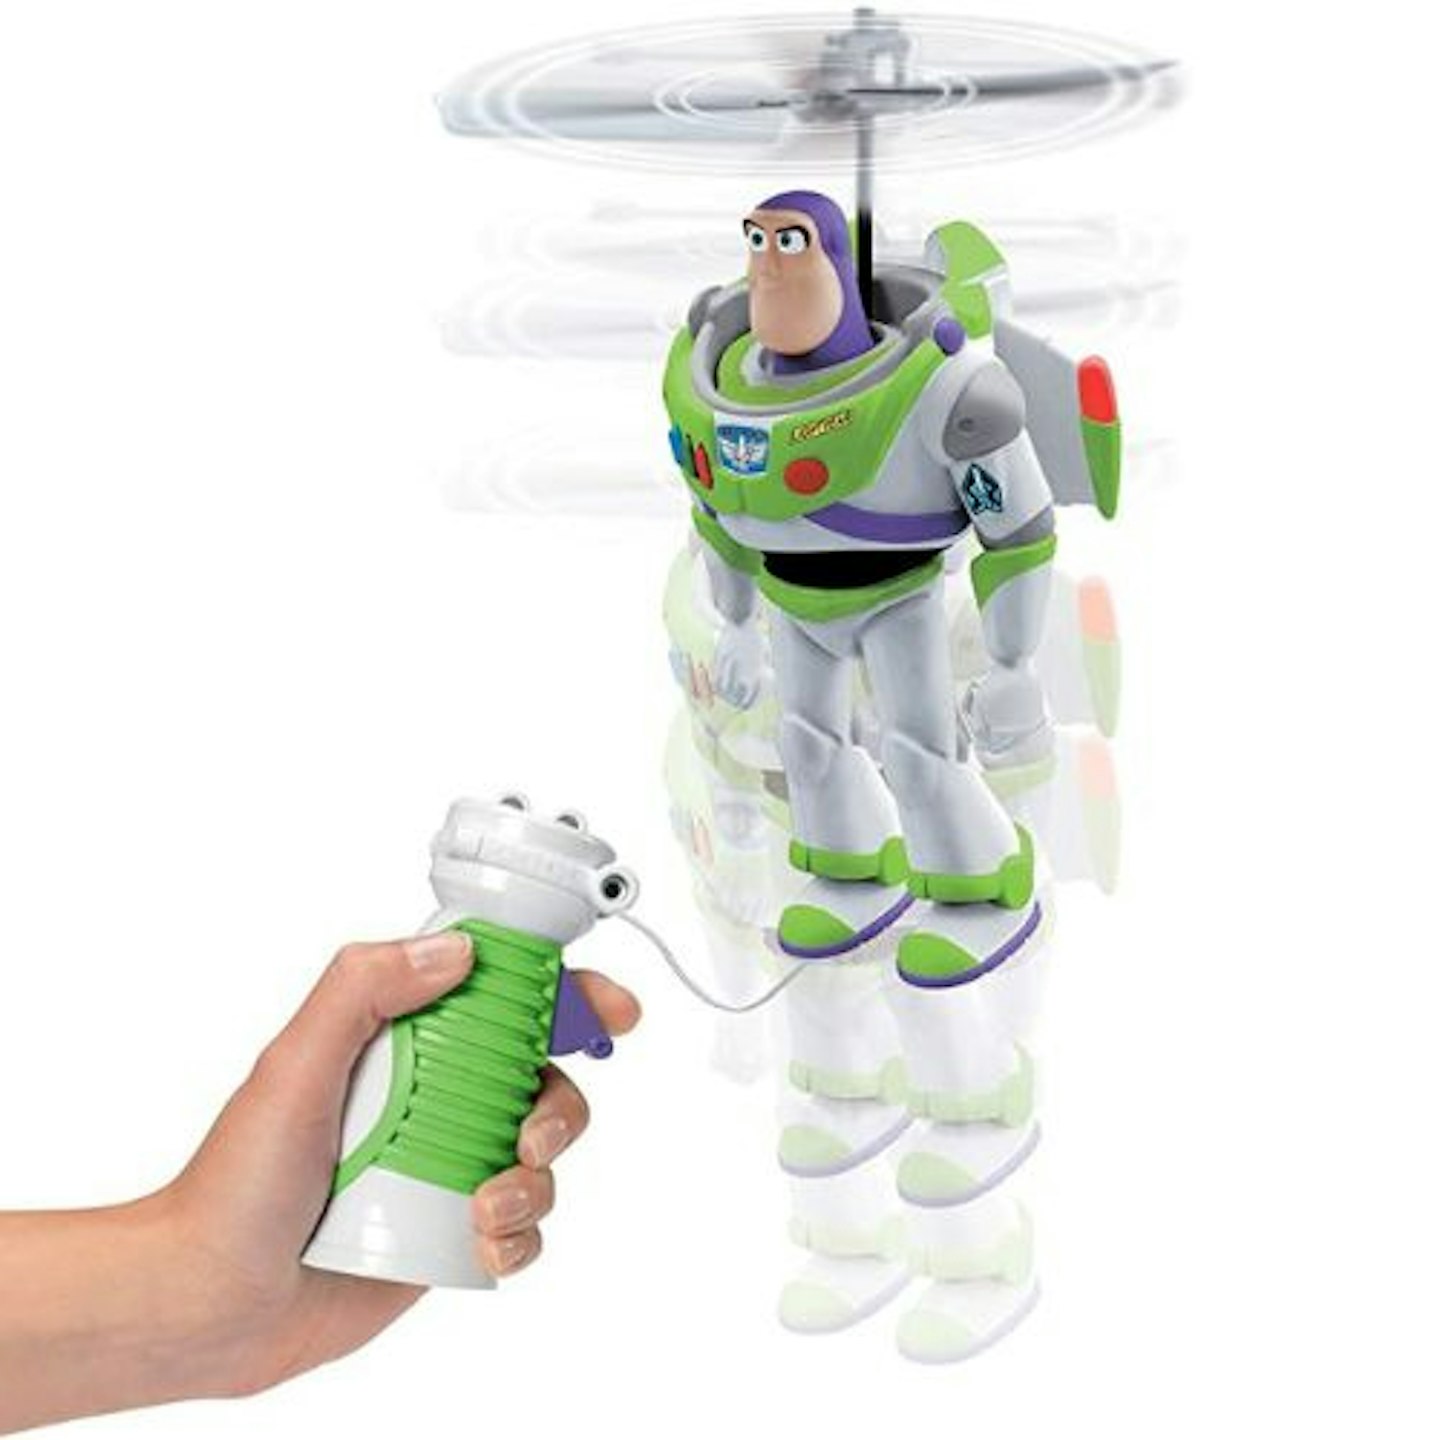 Disney Toy Story Pixar 4-Cable Flying Buzz Lightyear